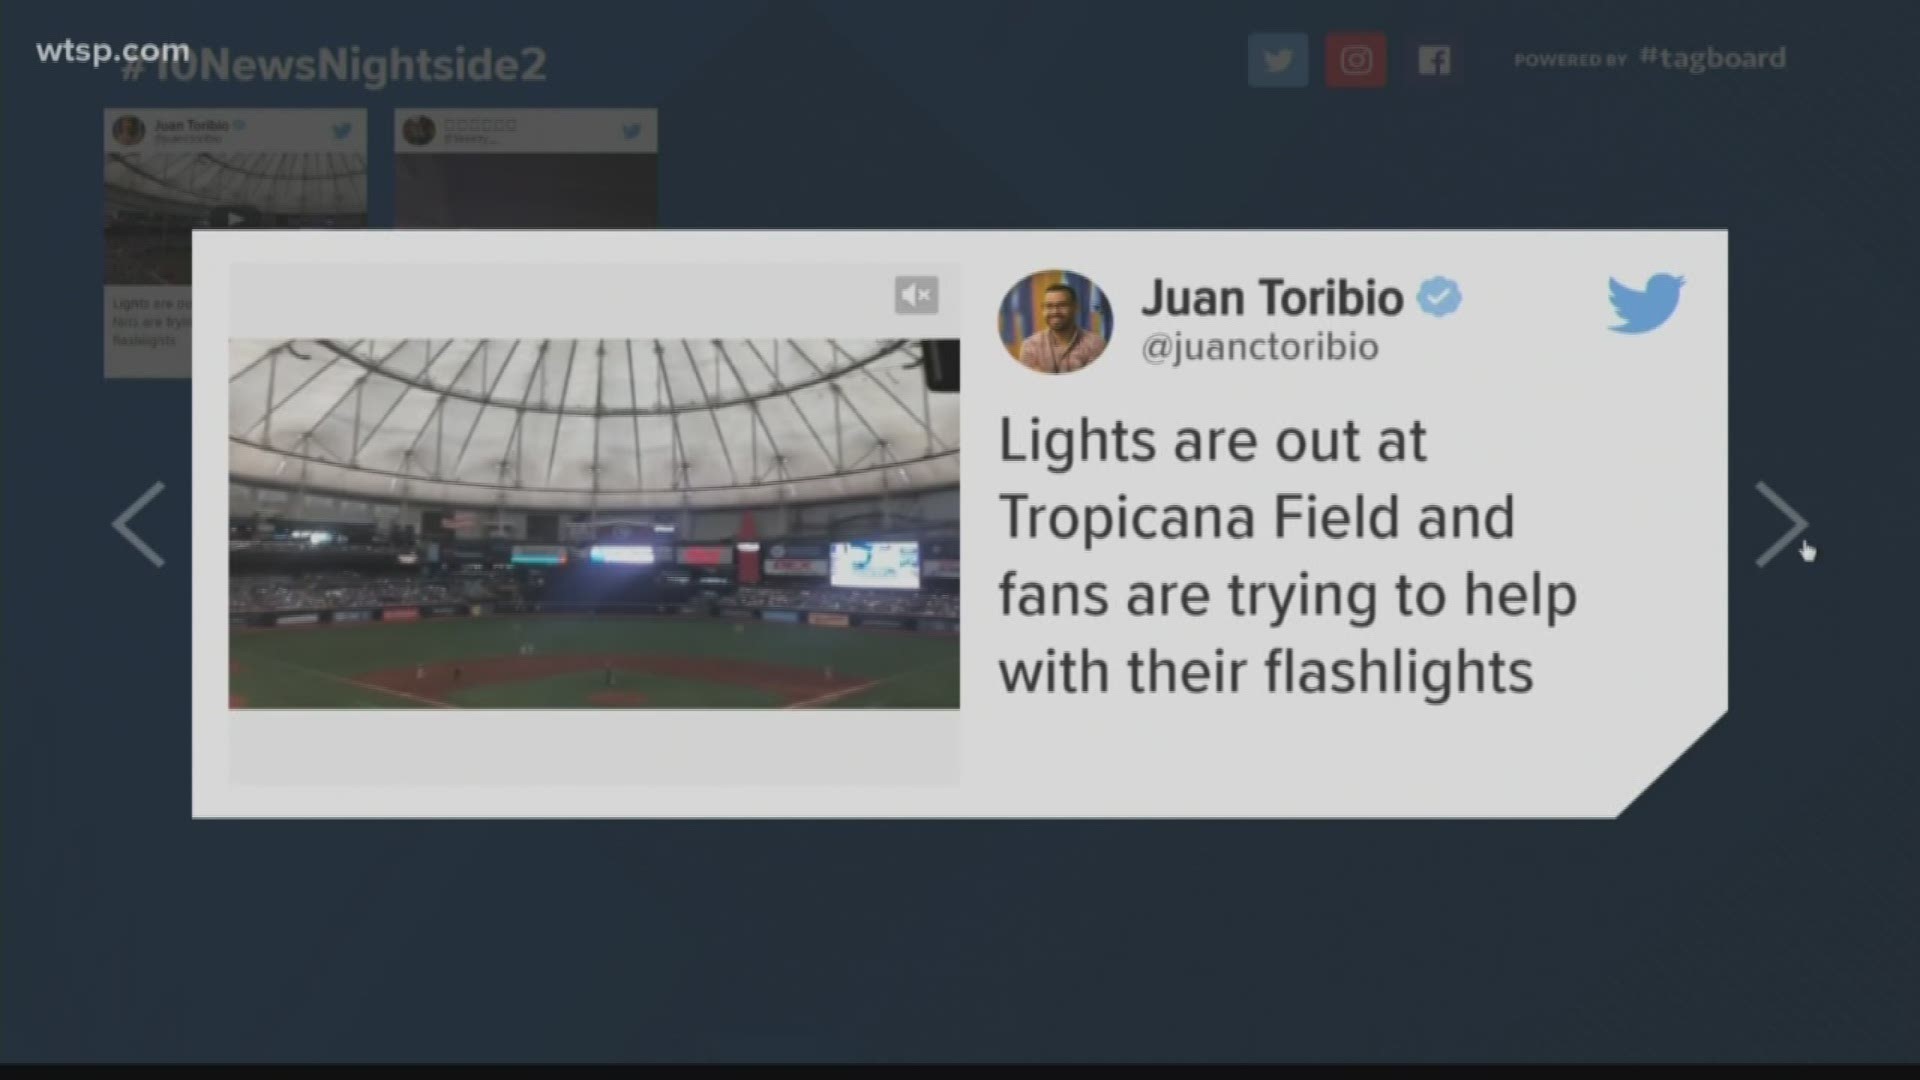 The New York Yankees and Tampa Bay Rays are being delayed in the ninth inning by a power outage at Tropicana Field.

The lights at the dome stadium went out after Austin Pruitt's first pitch to Thairo Estrada leading off the ninth inning Sunday.

Both teams' television broadcasts also lost power.

The Tampa Bay Rays later tweeted the power outage came from a main switch in the building failing.